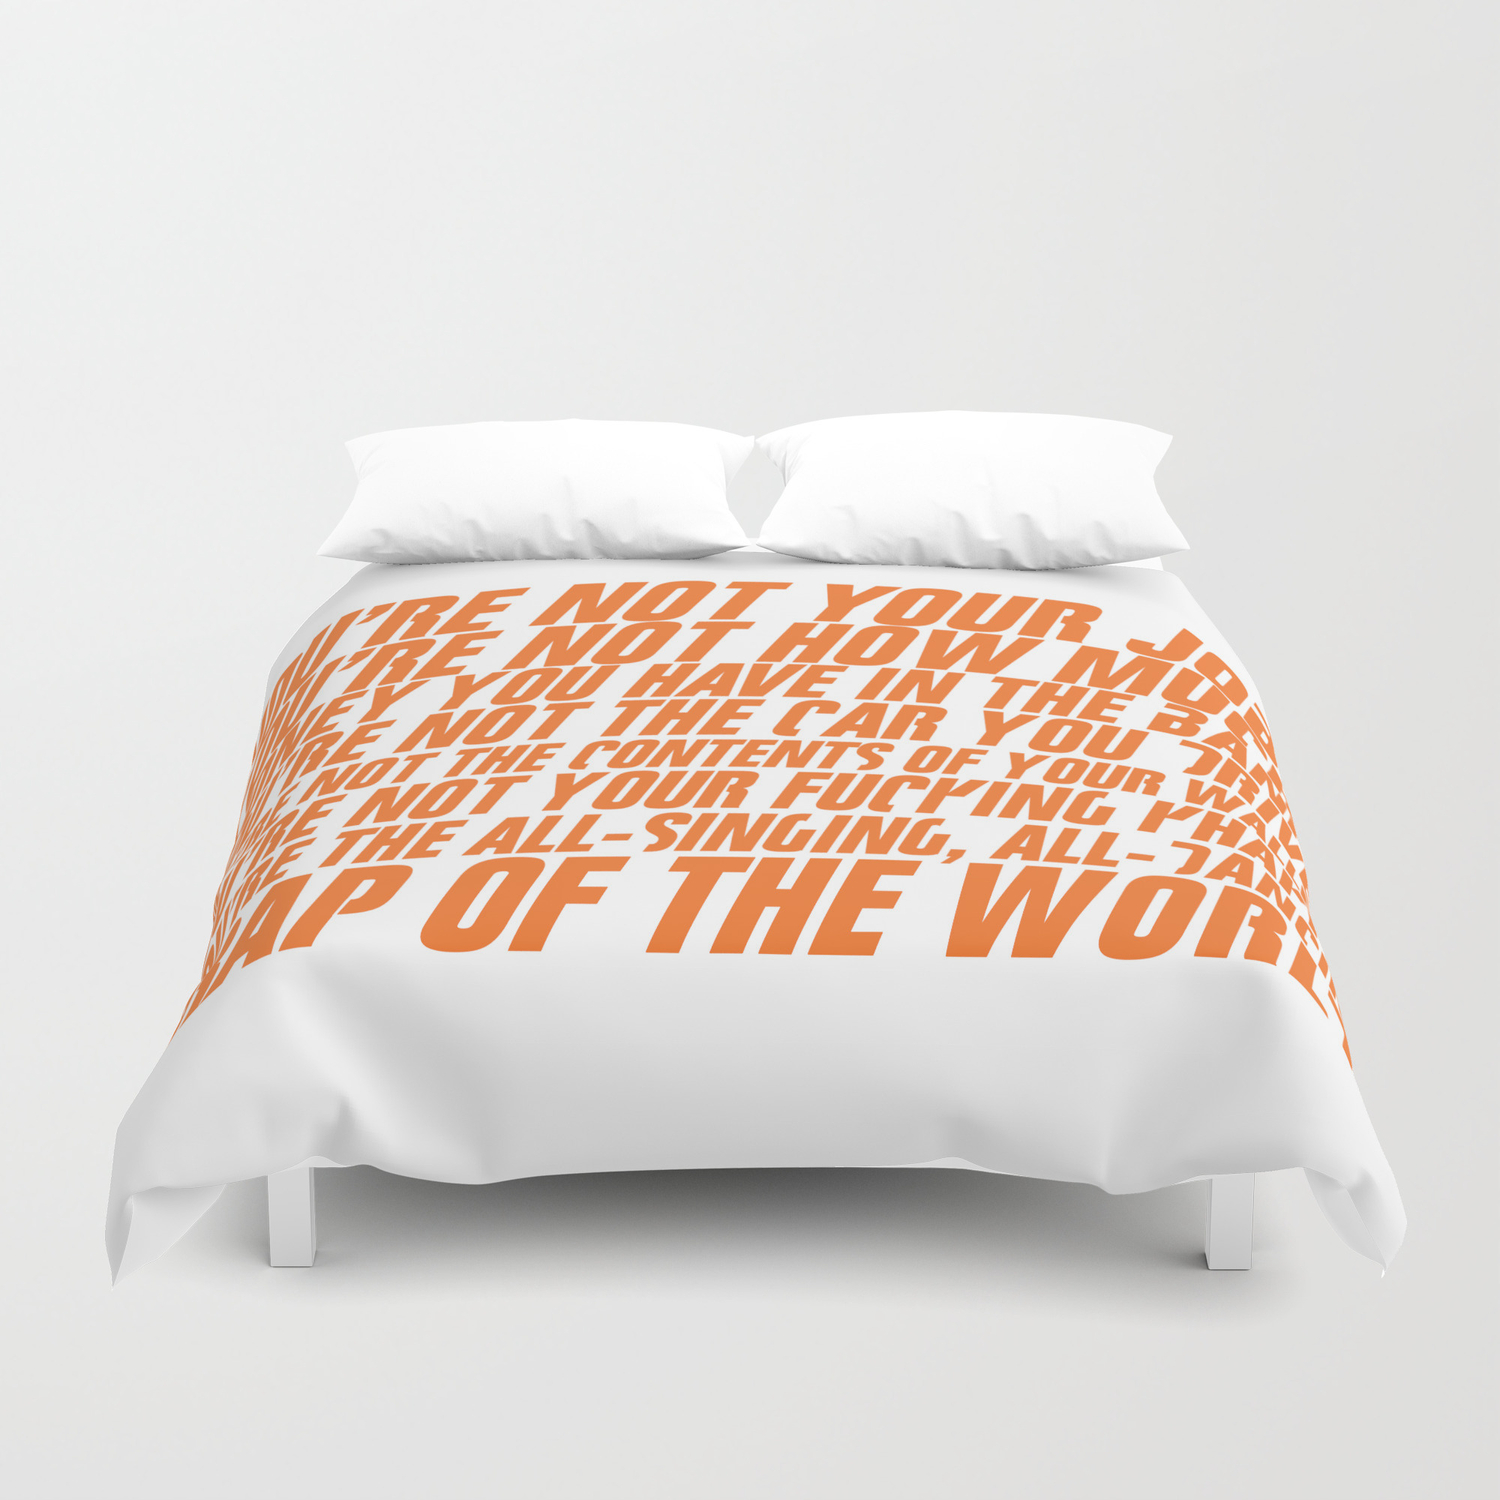 You Re Not Your Job Duvet Cover By Elvisbranchini Society6